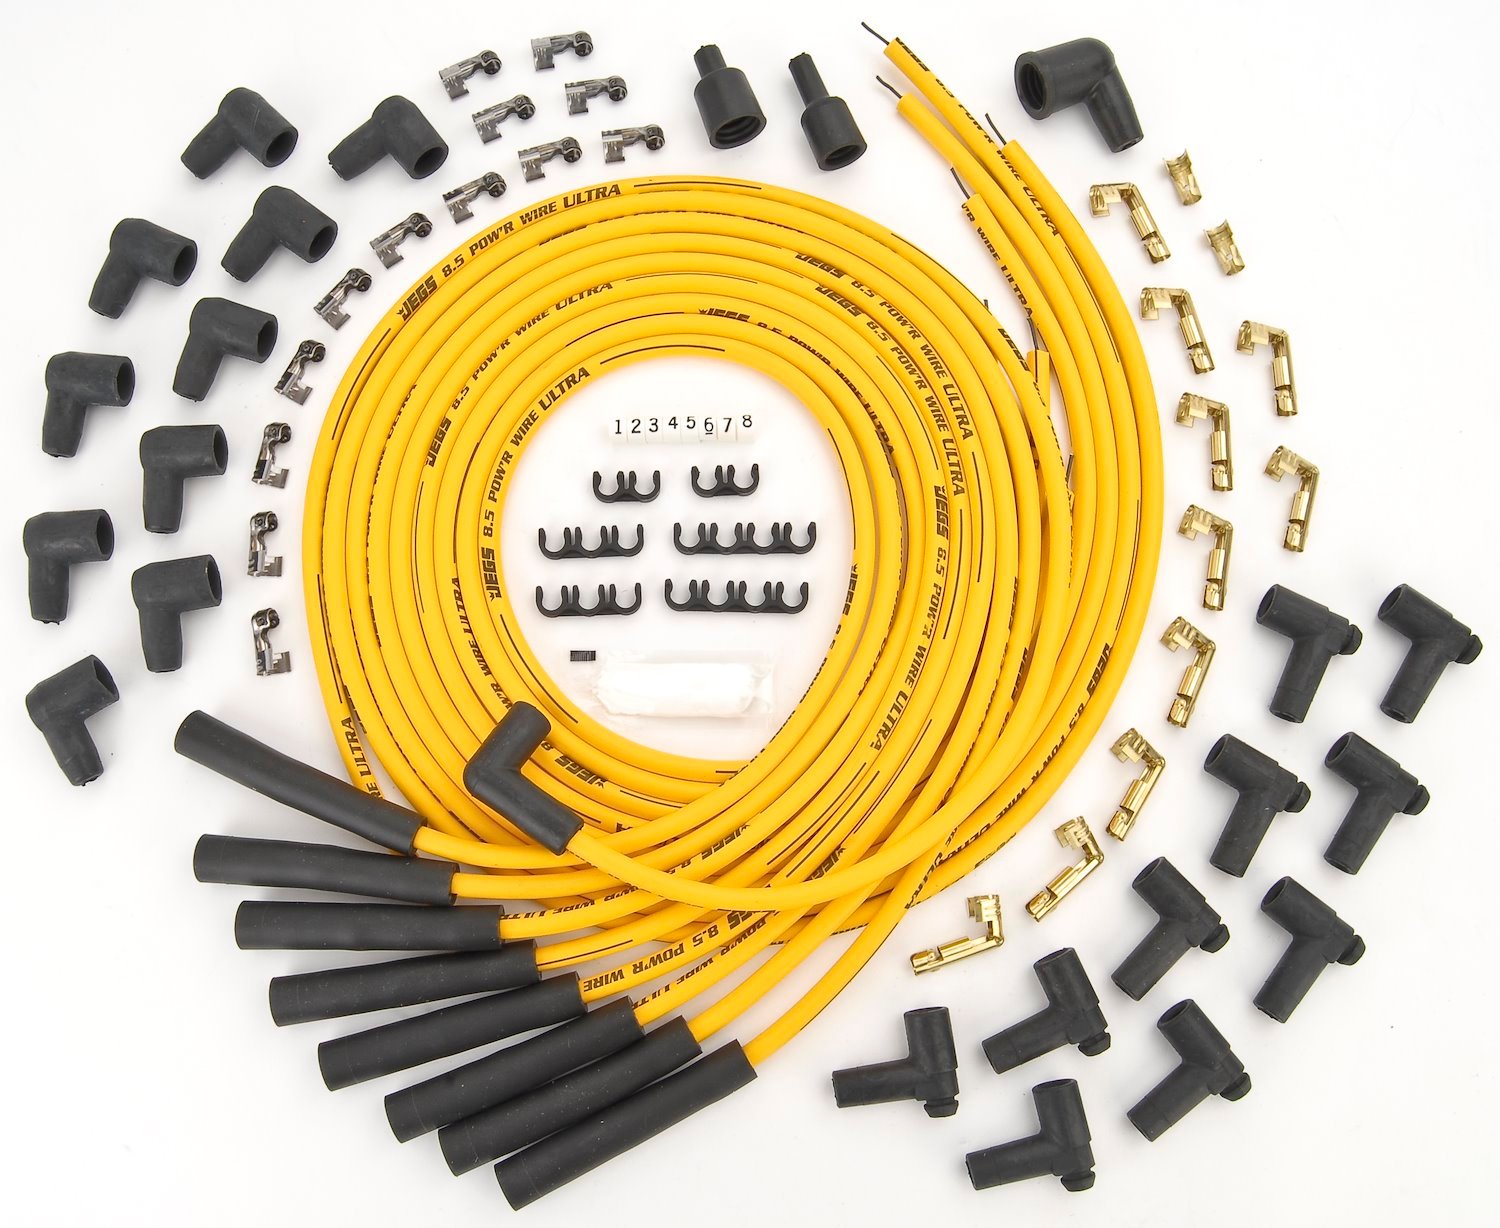 8.5mm Yellow Ultra Pow'r Wires Small & Big